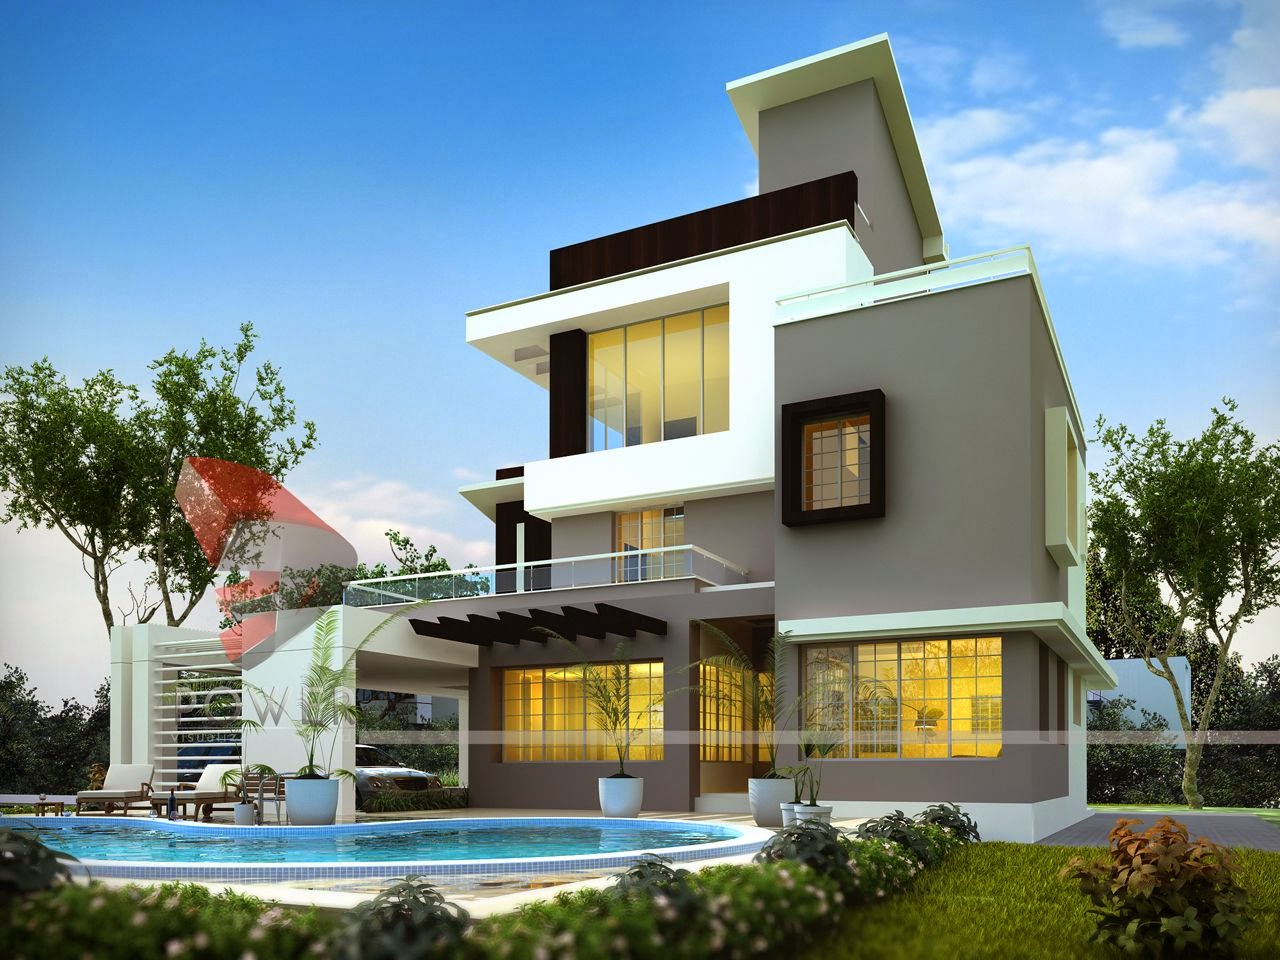 Front Exterior Design Of Indian Bungalow